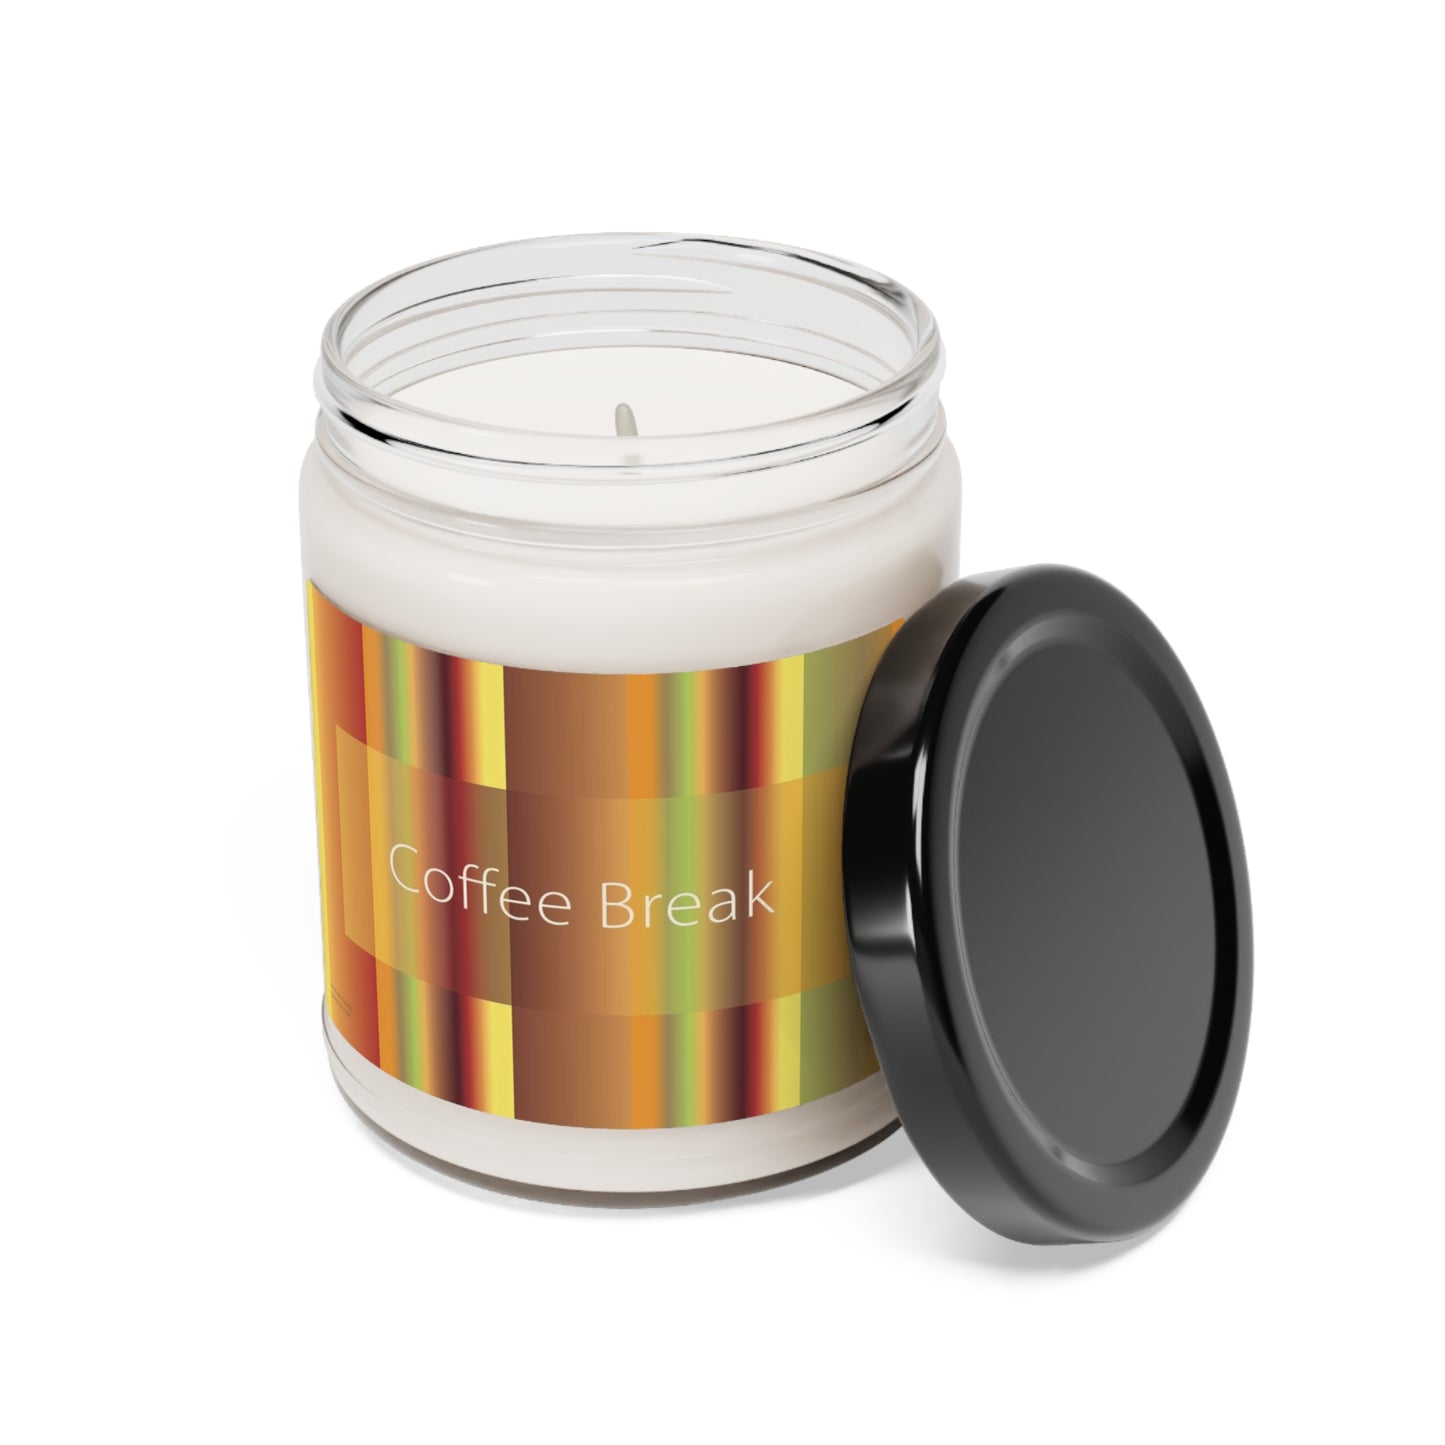 Scented Soy Candle, 9oz Coffee Break - Design No.1200